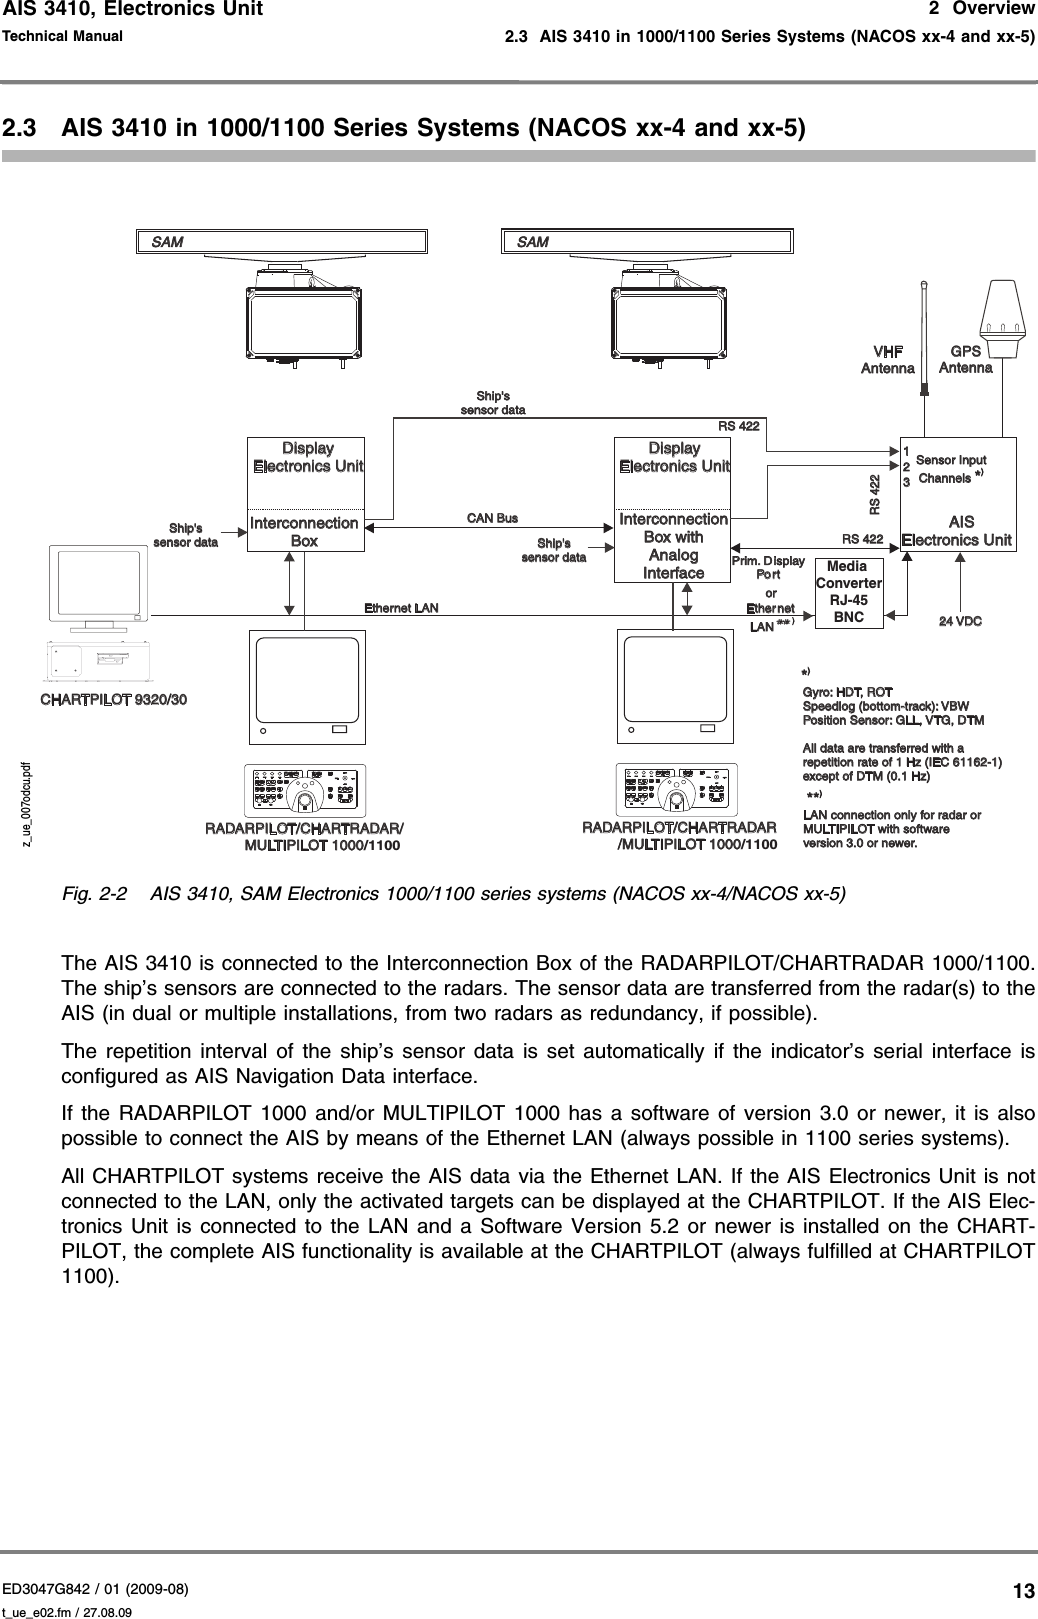 AIS 3410, Electronics UnitED3047G842 / 01 (2009-08)Technical Manual2  Overview2.3  AIS 3410 in 1000/1100 Series Systems (NACOS xx-4 and xx-5)t_ue_e02.fm / 27.08.09132.3 AIS 3410 in 1000/1100 Series Systems (NACOS xx-4 and xx-5)Fig. 2-2 AIS 3410, SAM Electronics 1000/1100 series systems (NACOS xx-4/NACOS xx-5)The AIS 3410 is connected to the Interconnection Box of the RADARPILOT/CHARTRADAR 1000/1100. The ship’s sensors are connected to the radars. The sensor data are transferred from the radar(s) to the AIS (in dual or multiple installations, from two radars as redundancy, if possible).The repetition interval of the ship’s sensor data is set automatically if the indicator’s serial interface is configured as AIS Navigation Data interface.If the RADARPILOT 1000 and/or MULTIPILOT 1000 has a software of version 3.0 or newer, it is also possible to connect the AIS by means of the Ethernet LAN (always possible in 1100 series systems).All CHARTPILOT systems receive the AIS data via the Ethernet LAN. If the AIS Electronics Unit is not connected to the LAN, only the activated targets can be displayed at the CHARTPILOT. If the AIS Elec-tronics Unit is connected to the LAN and a Software Version 5.2 or newer is installed on the CHART-PILOT, the complete AIS functionality is available at the CHARTPILOT (always fulfilled at CHARTPILOT 1100).InterconnectionBoxInterconnectionBox withAnalogInterfaceVHFAntennaCHARTPILOT 9320/30RADARPILOT/CHARTRADAR/MULTIPILOT 1000RADARPILOT/CHARTRADAR/MULTIPILOT 1000Ethernet LANShip&apos;ssensor dataShip&apos;ssensor dataShip&apos;ssensor dataCAN BusRS 422RS 422RS 422DisplayElectronics UnitDisplayElectronics UnitAISElectronics UnitGPSAntennaSAMPrim. DisplayPo rtEthernetLAN**orSensor InputChannels*)123*)Gyro: HDT, ROTSpeedlog (bottom-track): VBWPosition Sensor: GLL, VTG, DTMAll data are transferred with arepetition rate of 1 Hz (IEC 61162-1)except of DTM (0.1 Hz)24 VDCLAN connection only for radar orMULTIPILOT with softwareversion 3.0 or newer.**)SAM/1100 /1100Media ConverterRJ-45BNCz_ue_007odcu.pdf